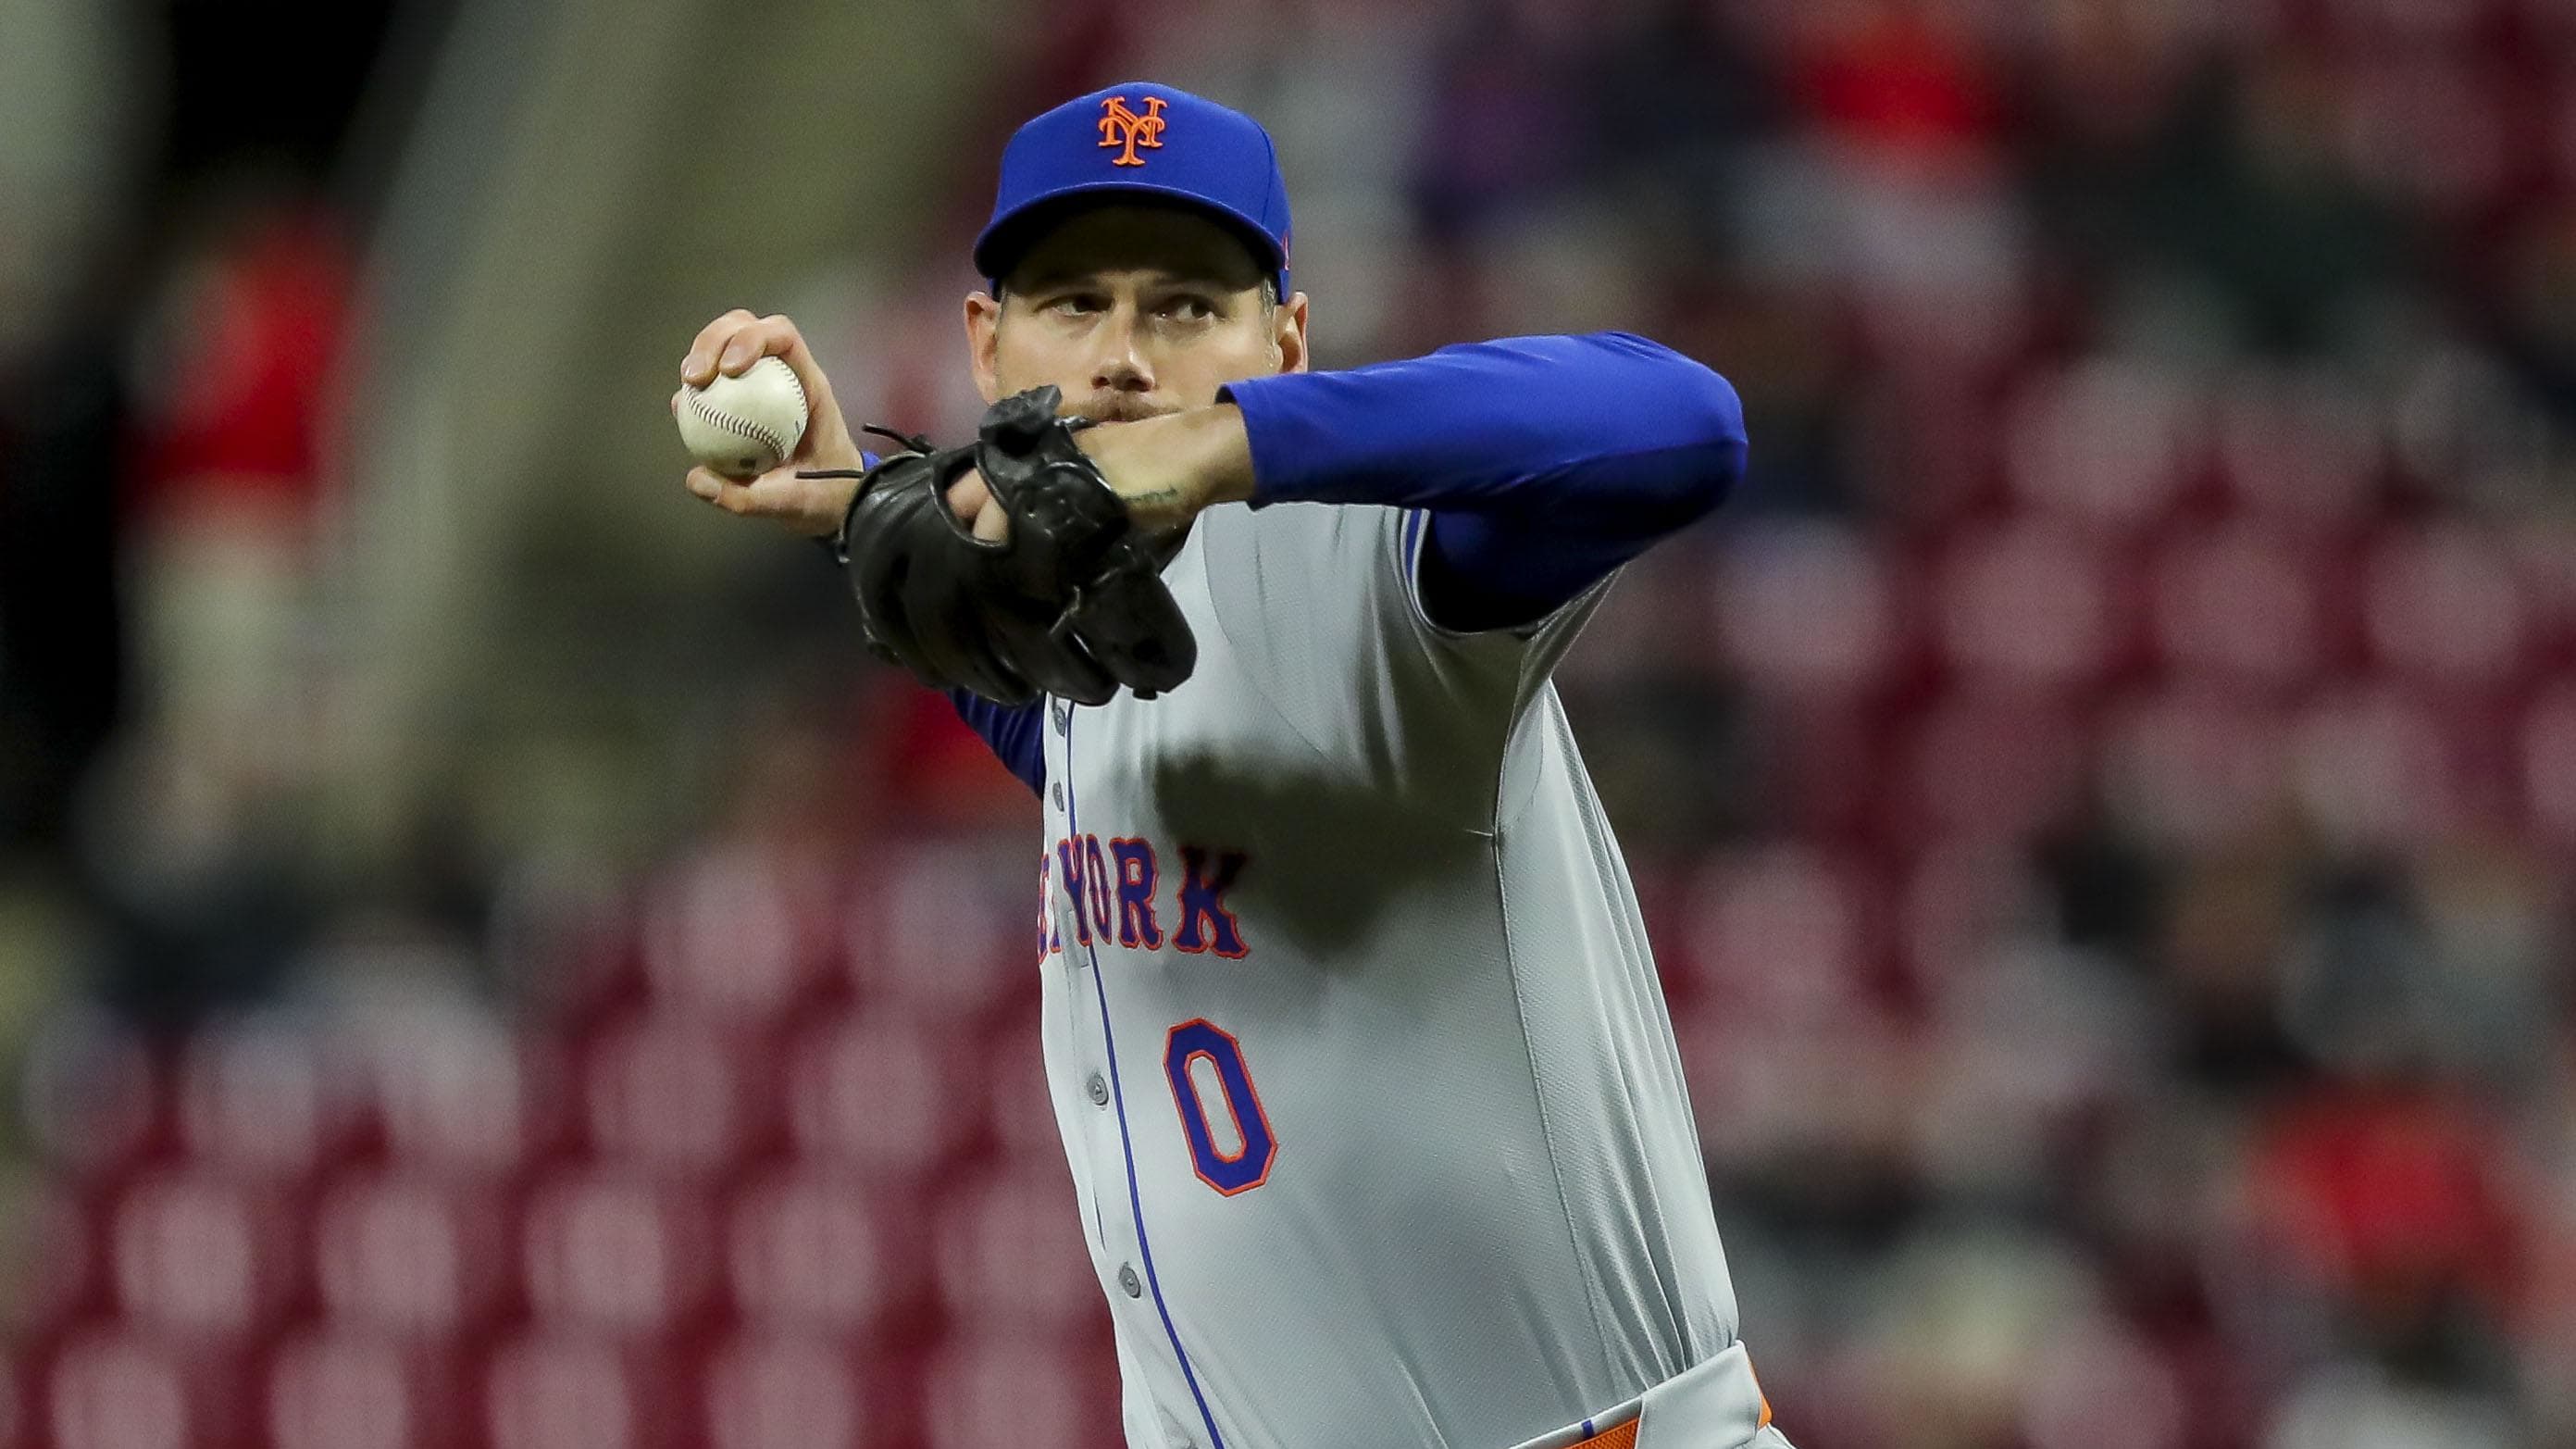 New York Mets Reliever: Focus On Pitchability To Curb Arm Injuries